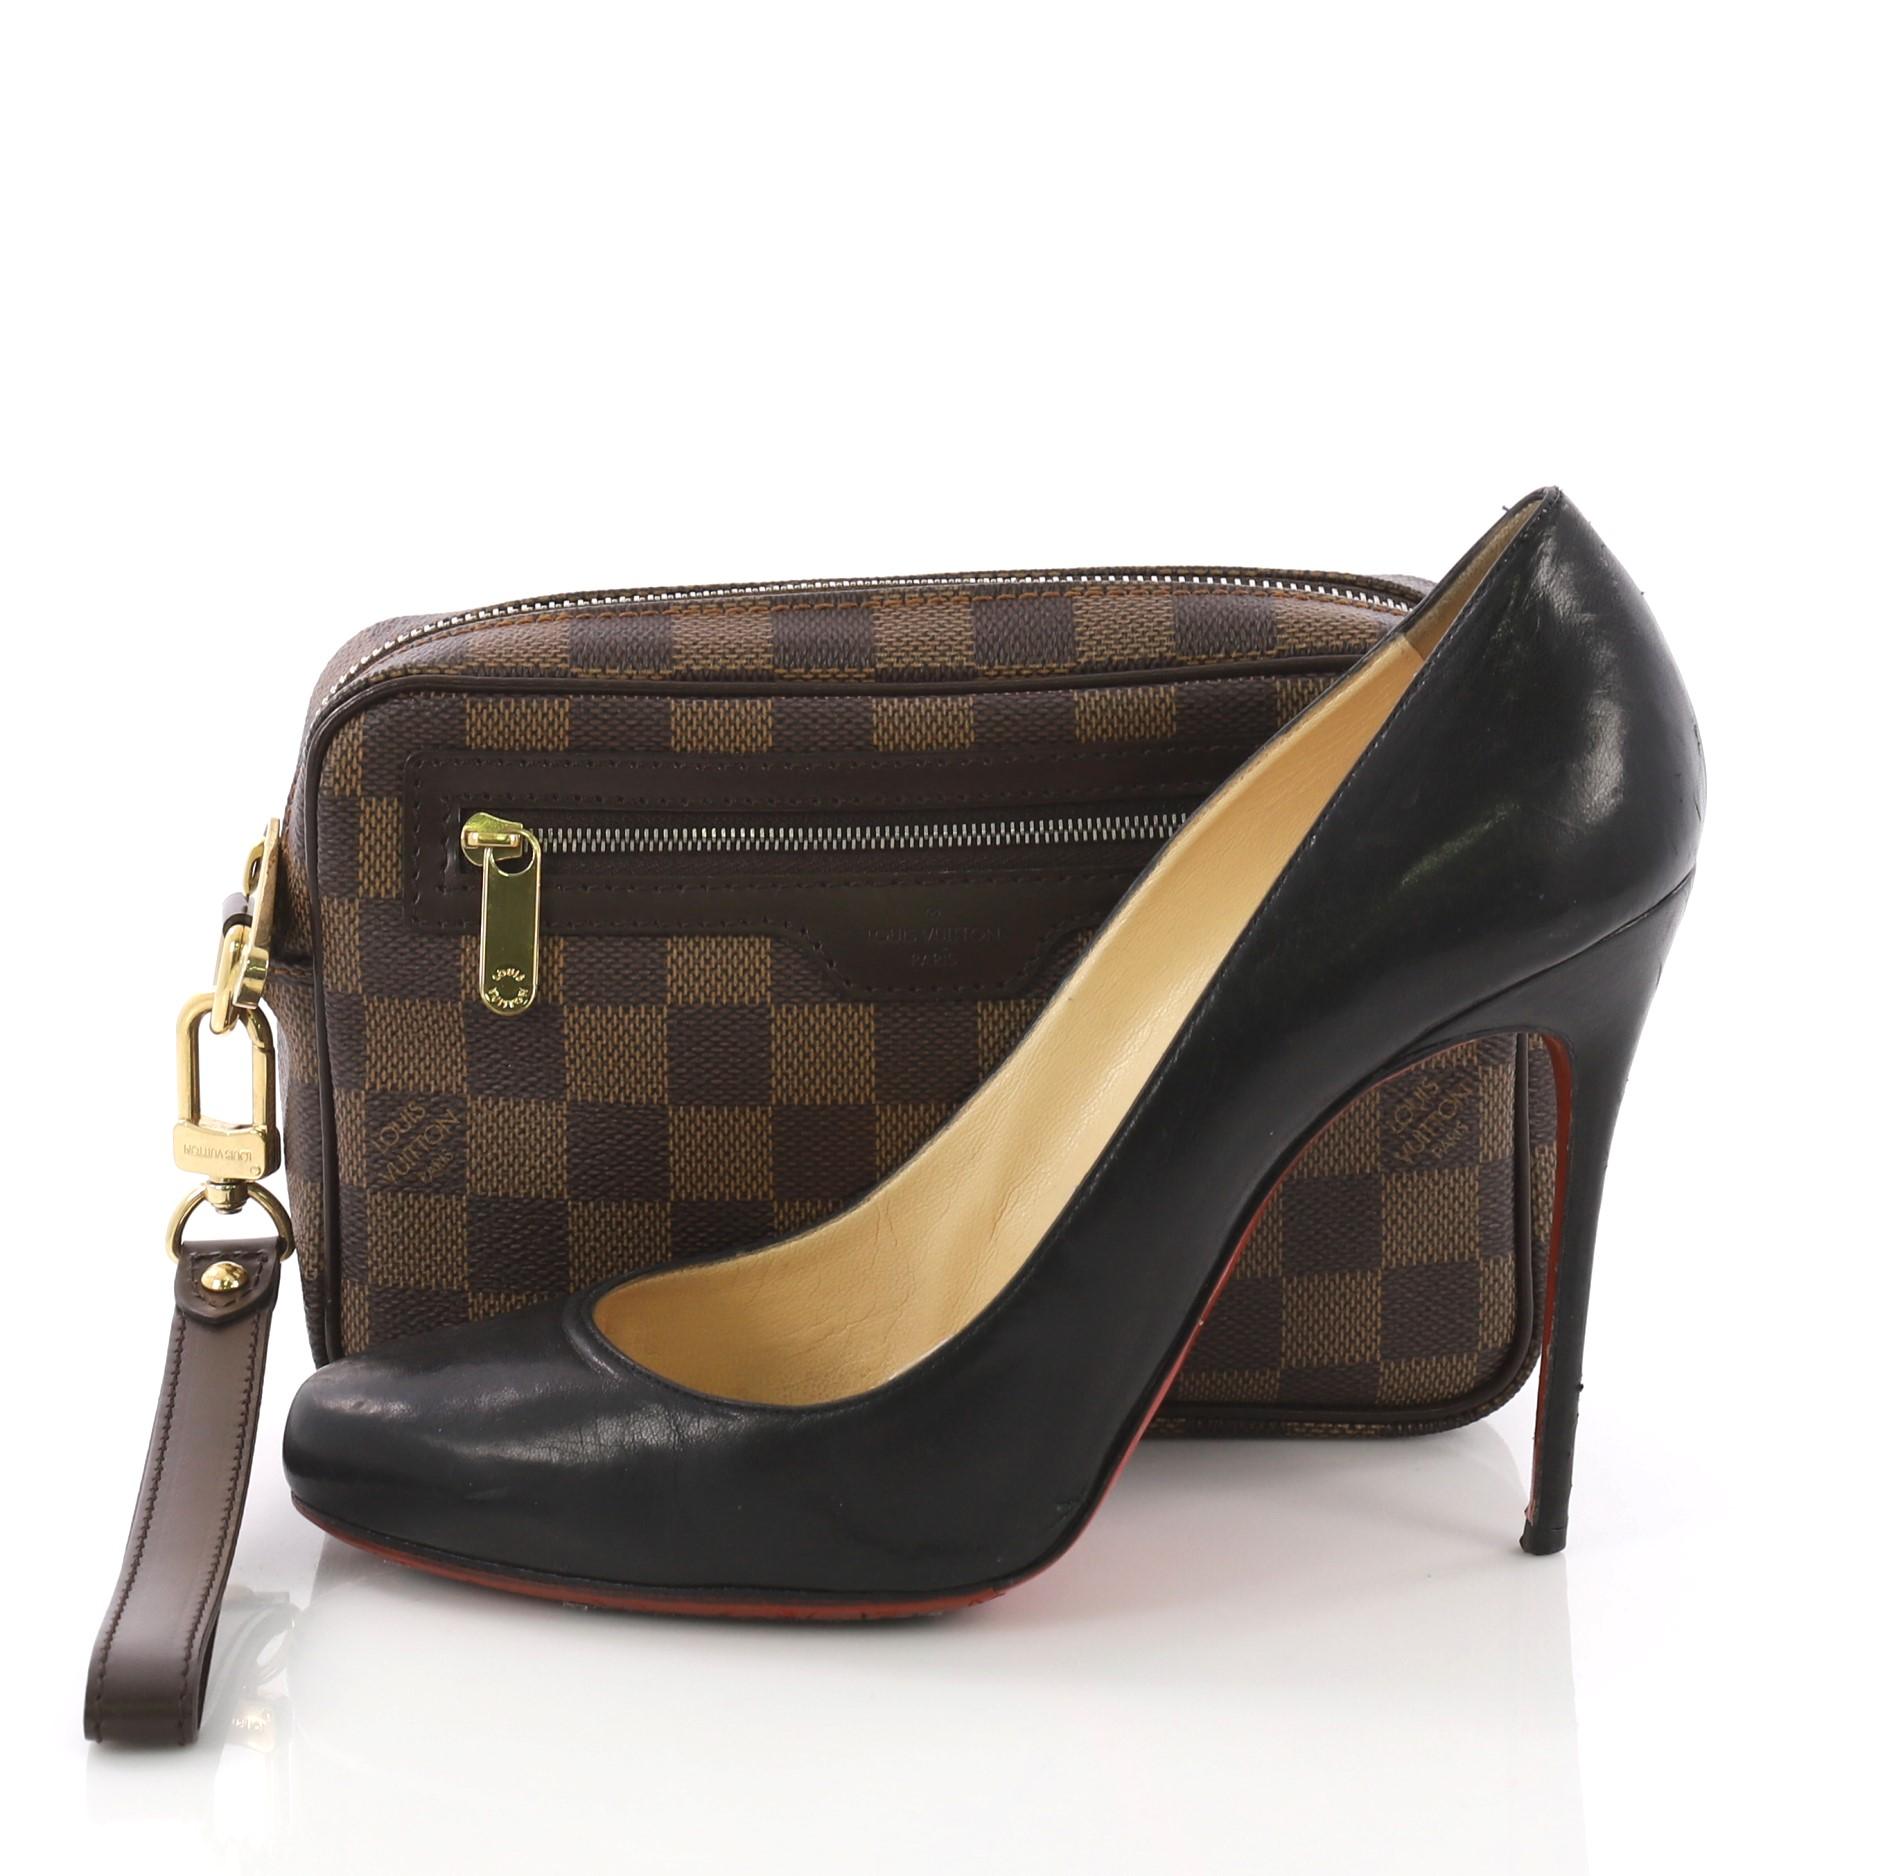 This Louis Vuitton Pochette Macao Damier, crafted in damier ebene coated canvas, features a wrist strap, dark brown leather trims, exterior front zip pocket and gold-tone hardware. Its zip closure open to a brown fabric interior with slip pockets.